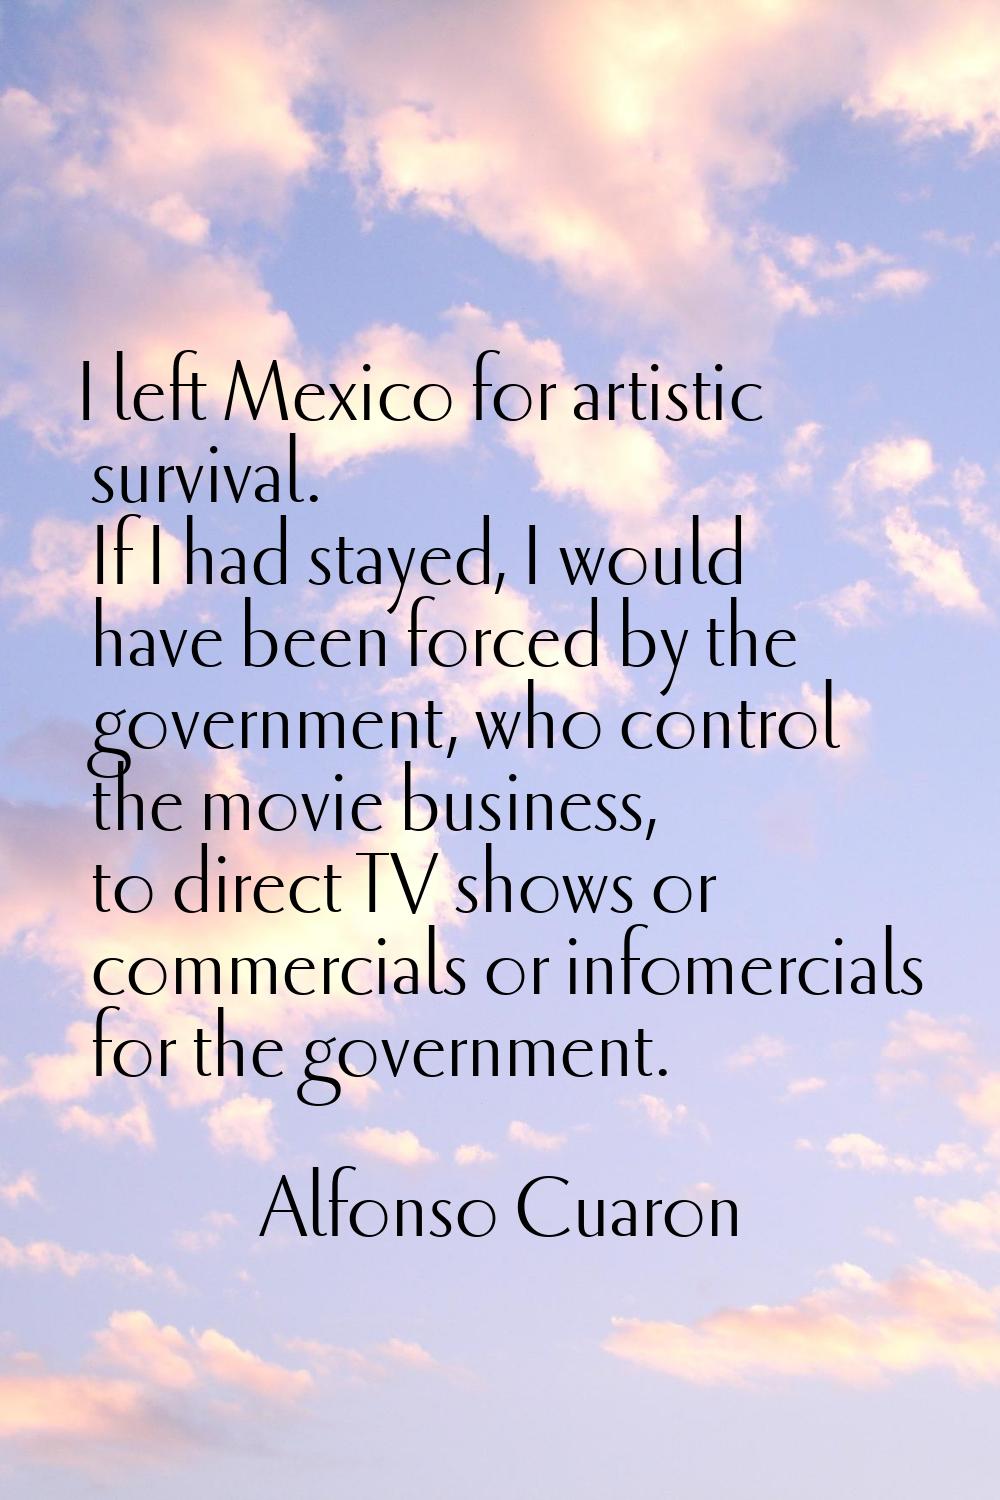 I left Mexico for artistic survival. If I had stayed, I would have been forced by the government, w